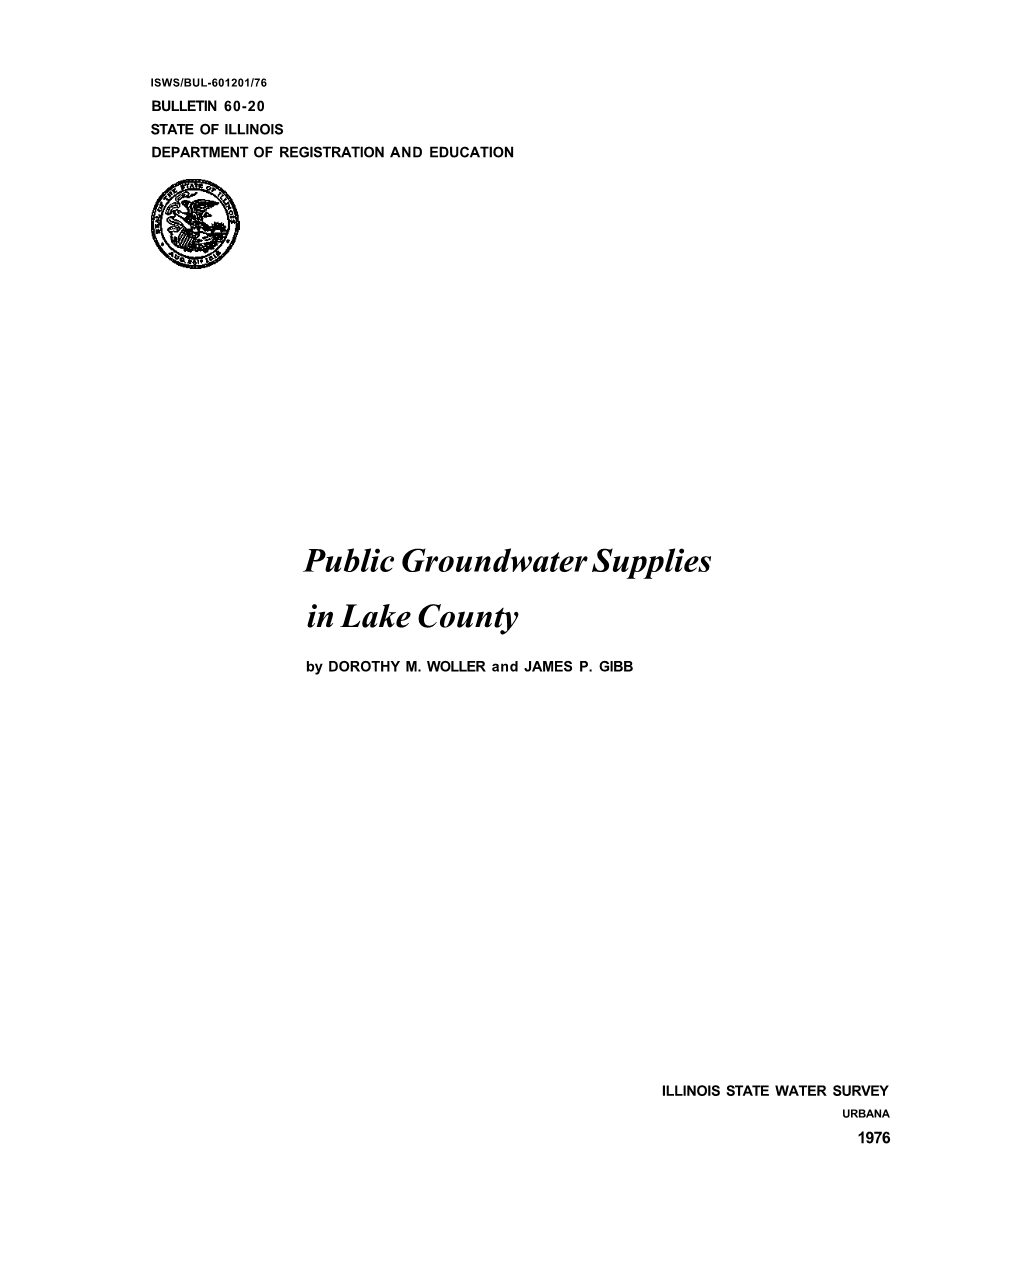 Public Groundwater Supplies in Lake County